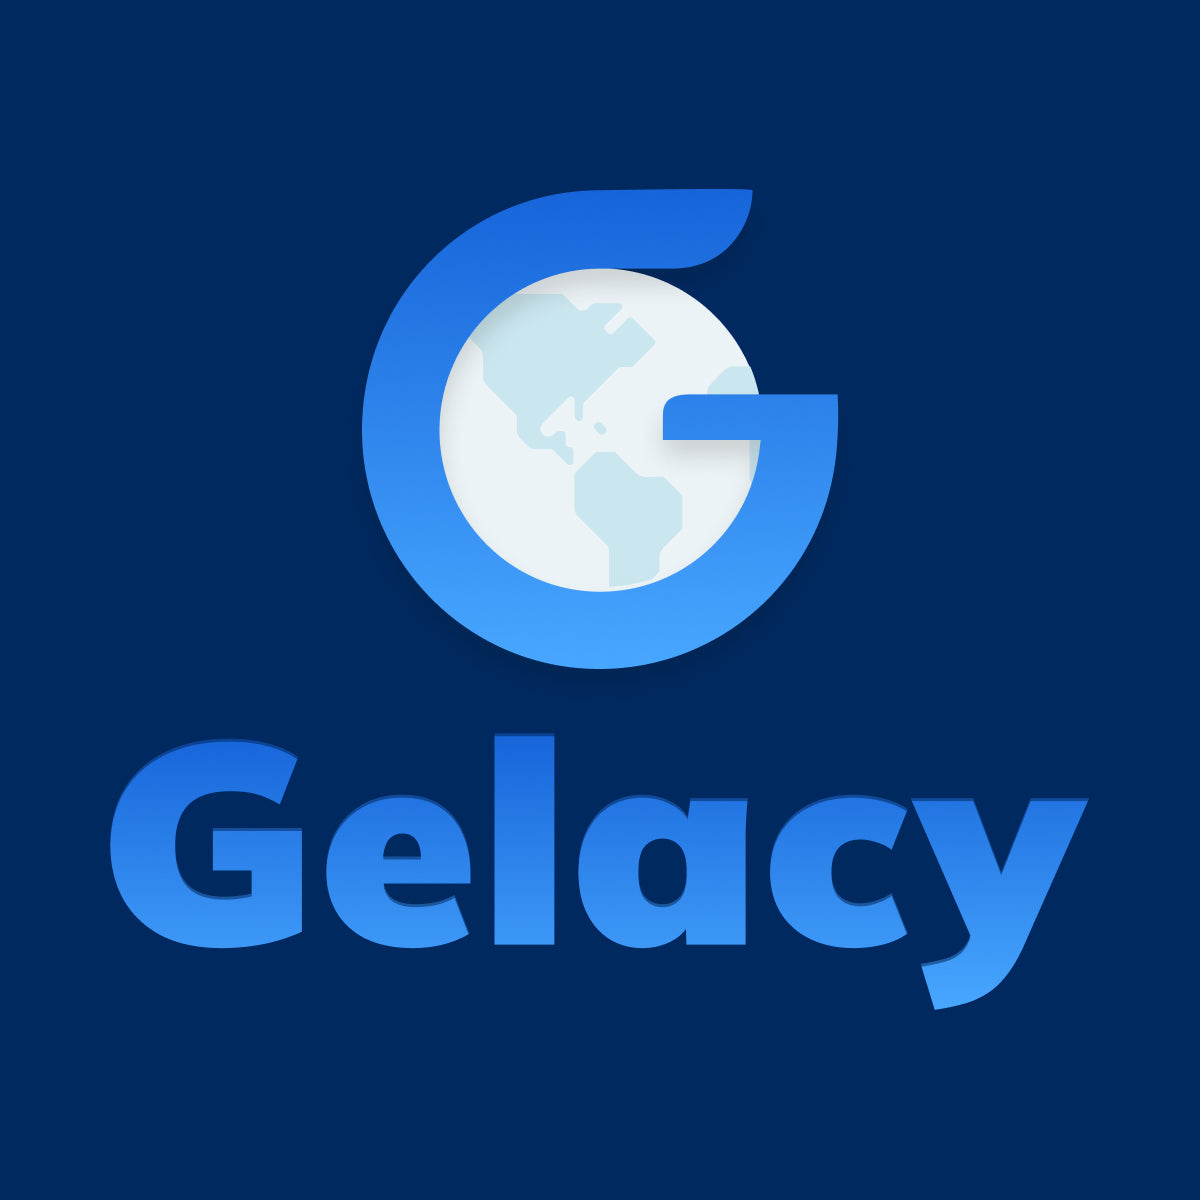 Gelacy ‑ Geolocation Redirects for Shopify